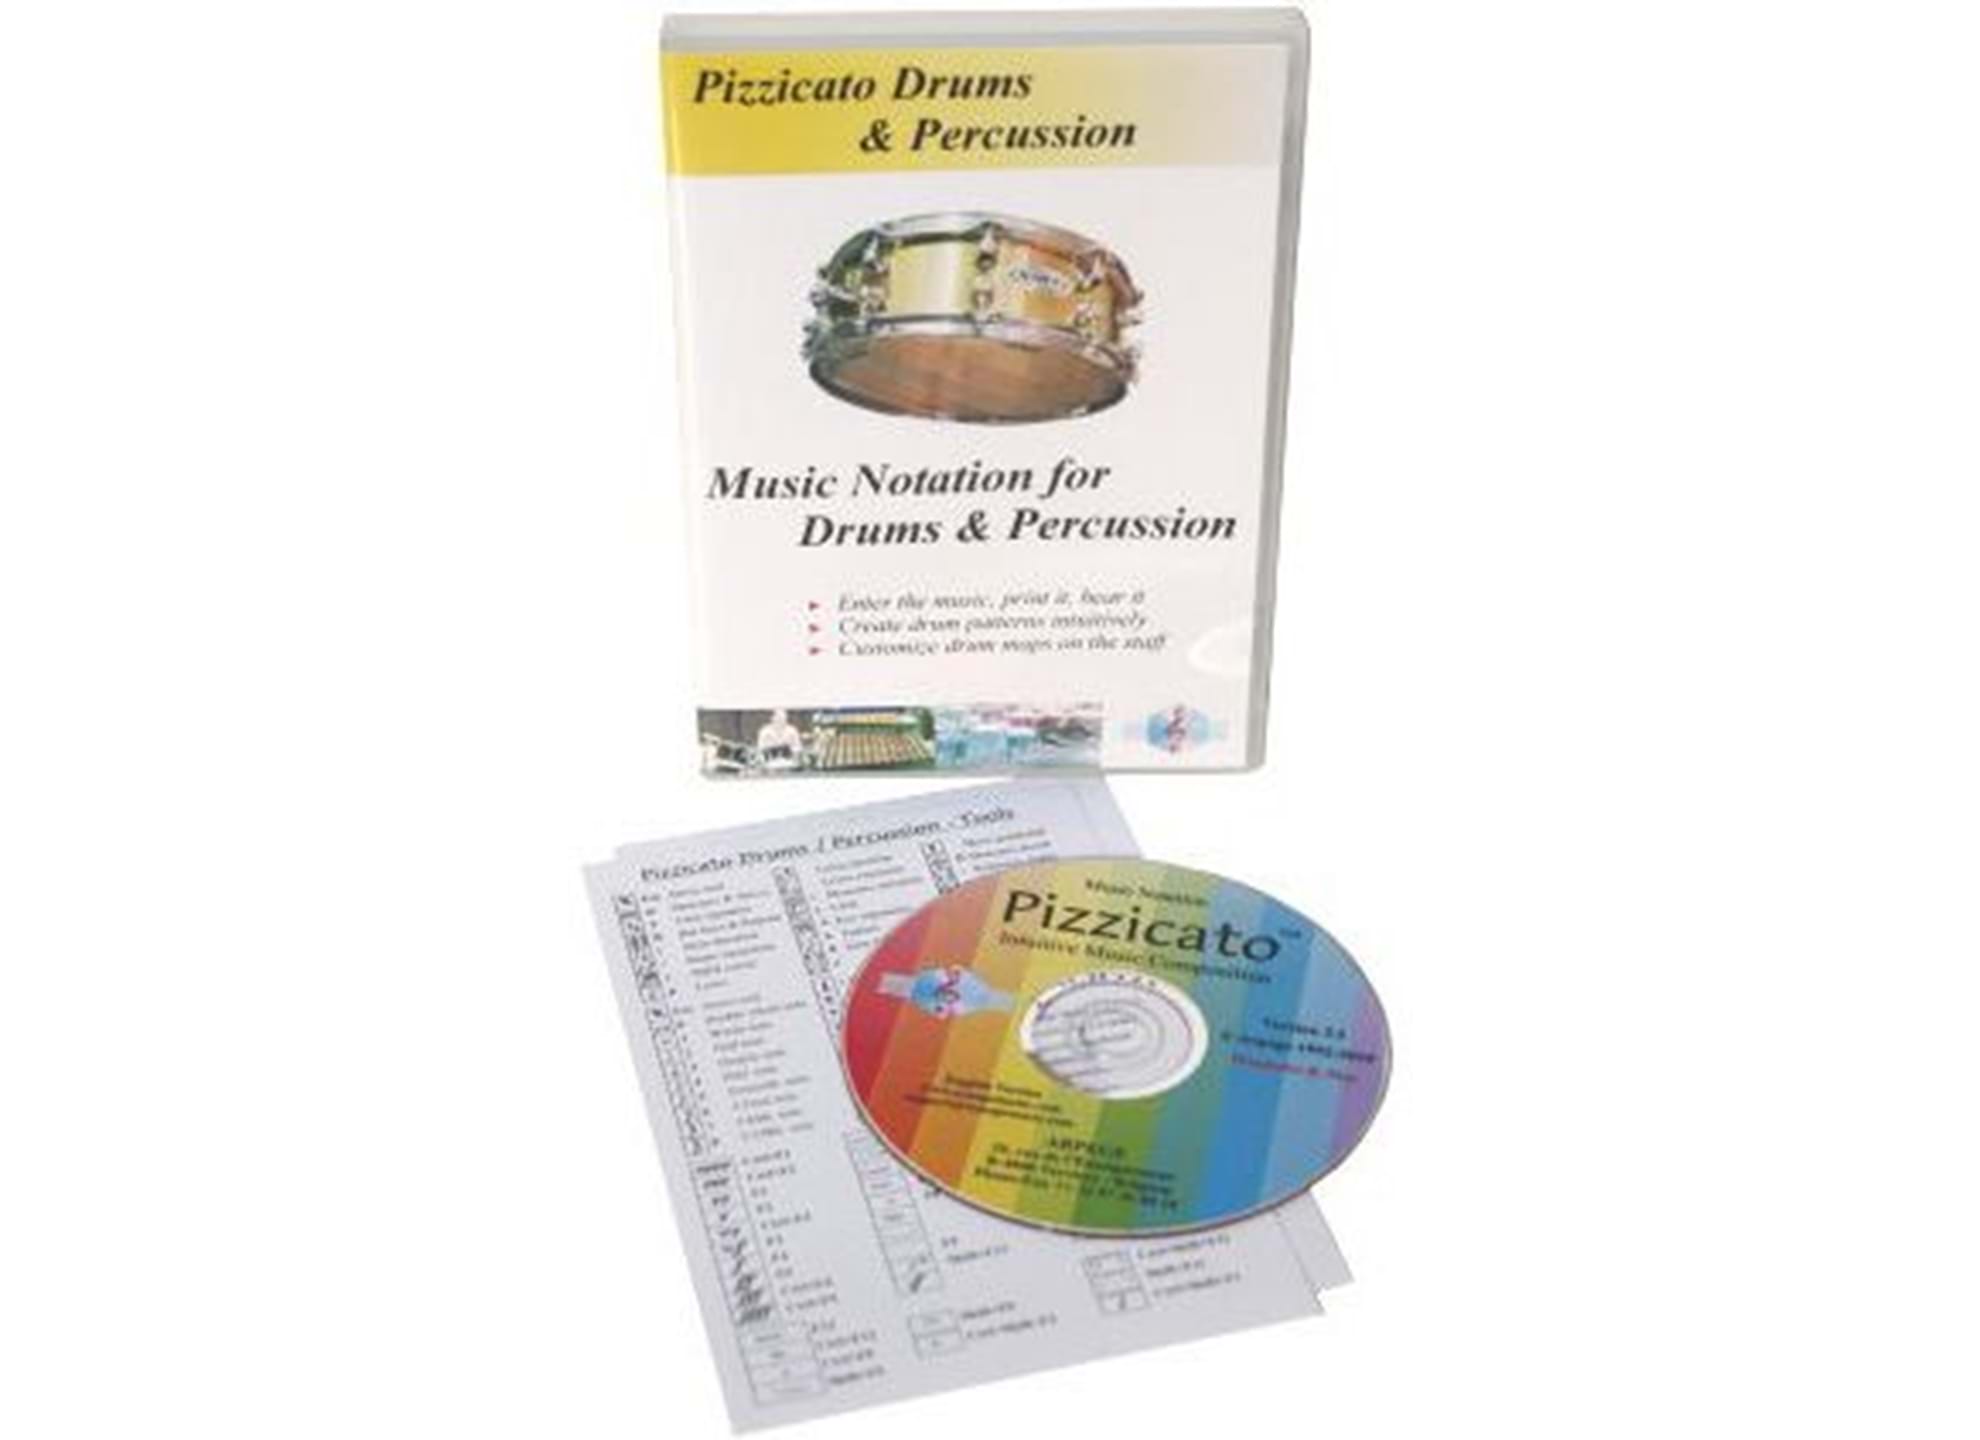 Pizzicato Drums & Percussion